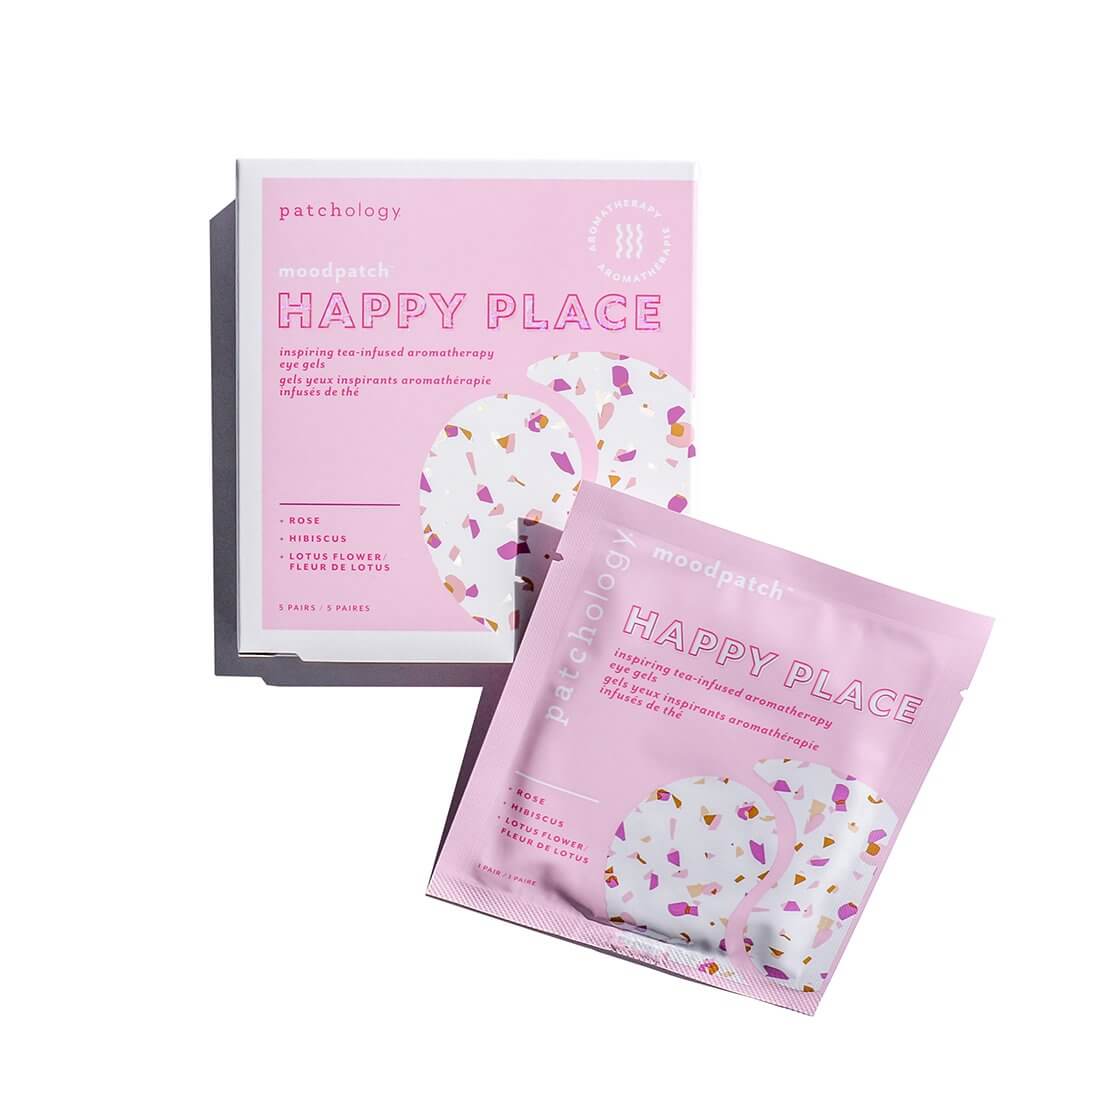 MOOD PATCH HAPPY PLACE EYE GELS